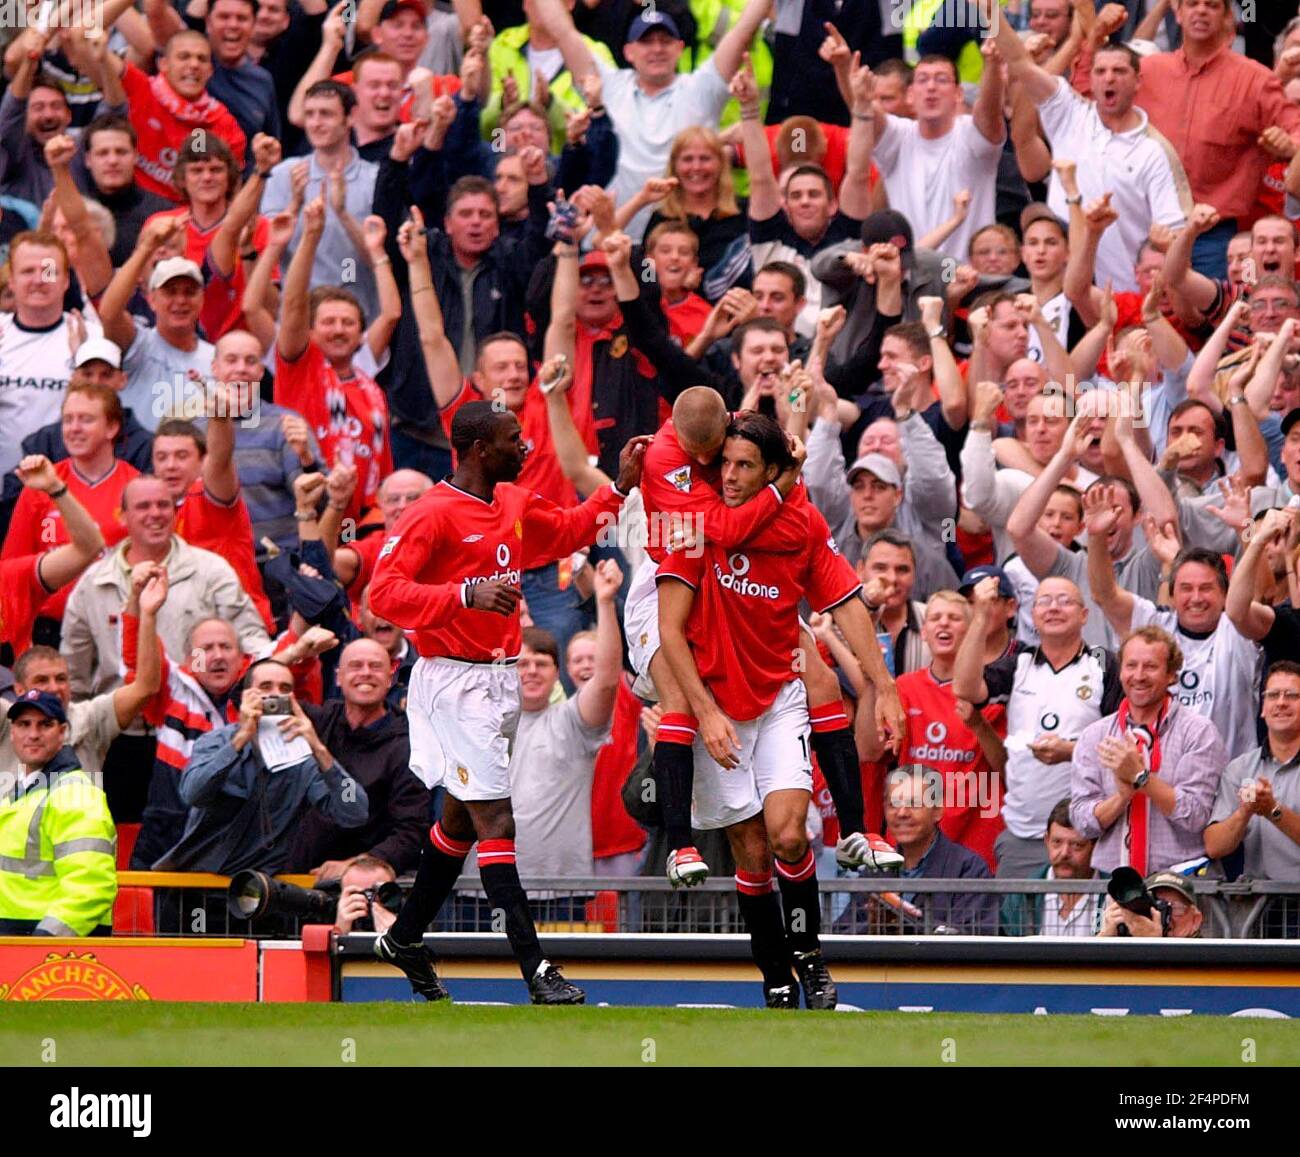 MANCHESTER UNITED V FULHAM NISTELROOY AFTER HIS 1ST GOAL Stock Photo